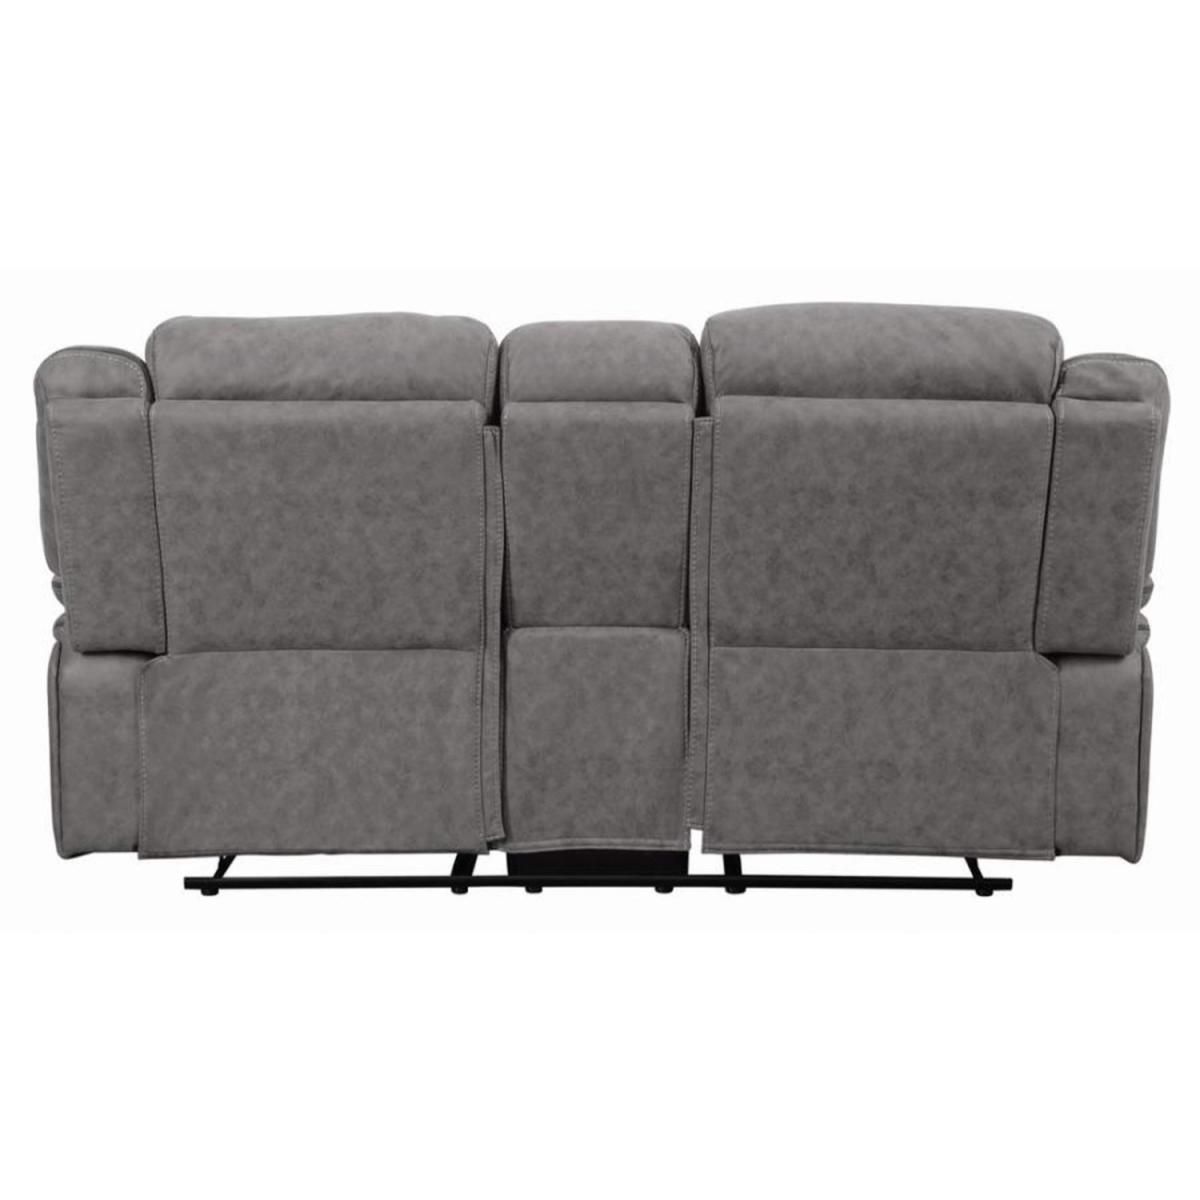 SILLON RECLINABLE HIGGINS 2 PERS. GRIS